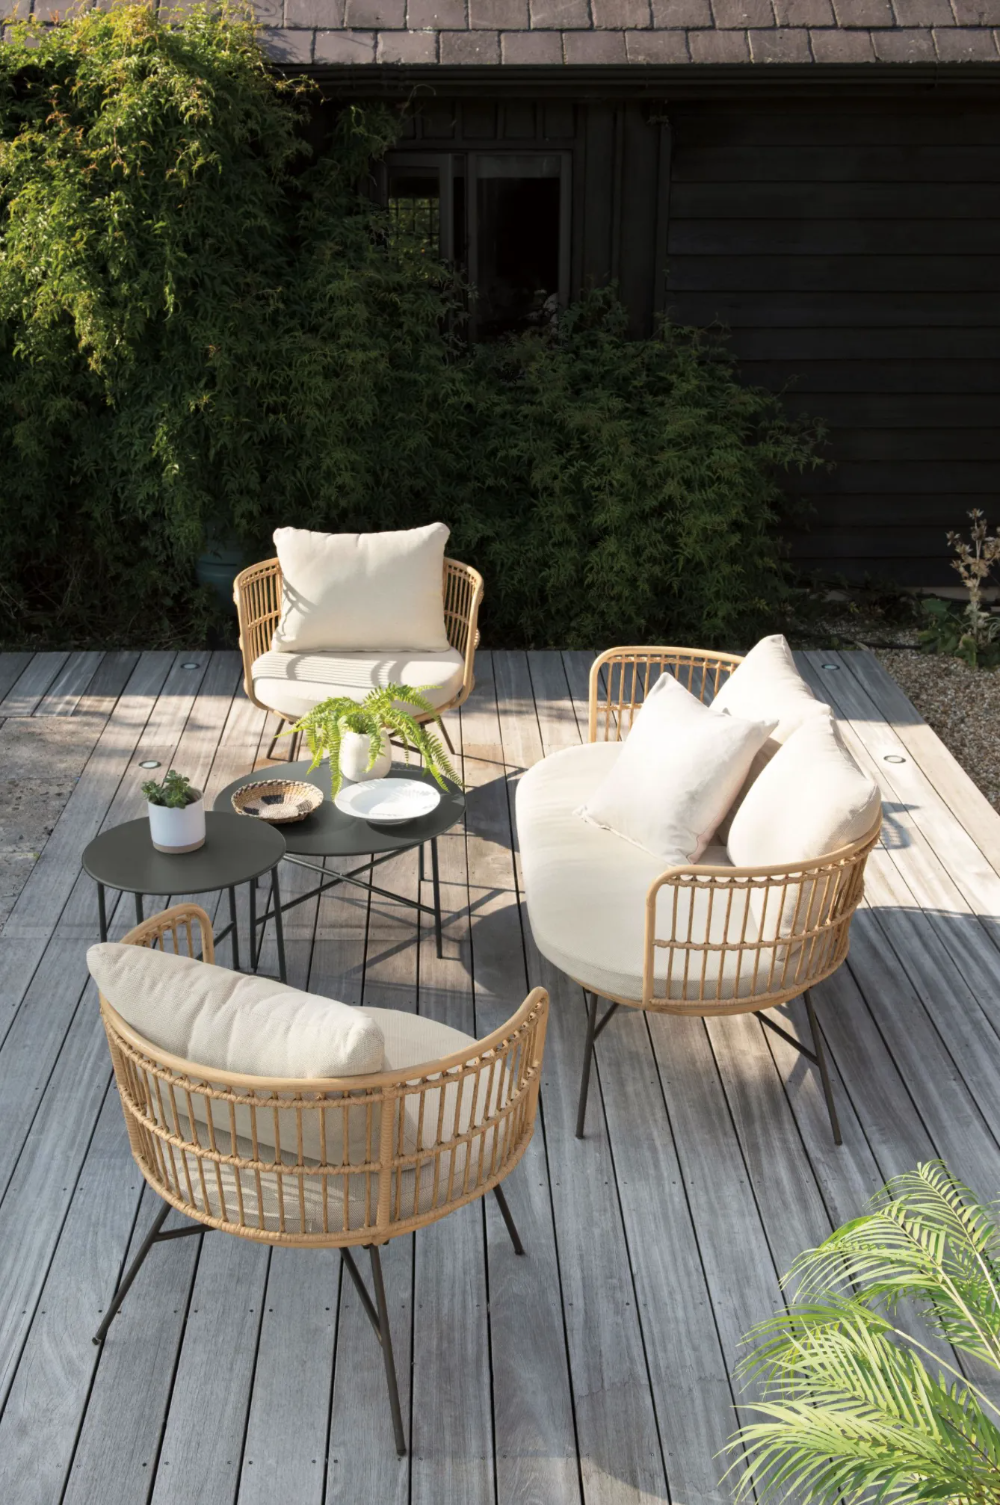 Outdoor Comfort: Relaxing with Stylish Garden Chairs